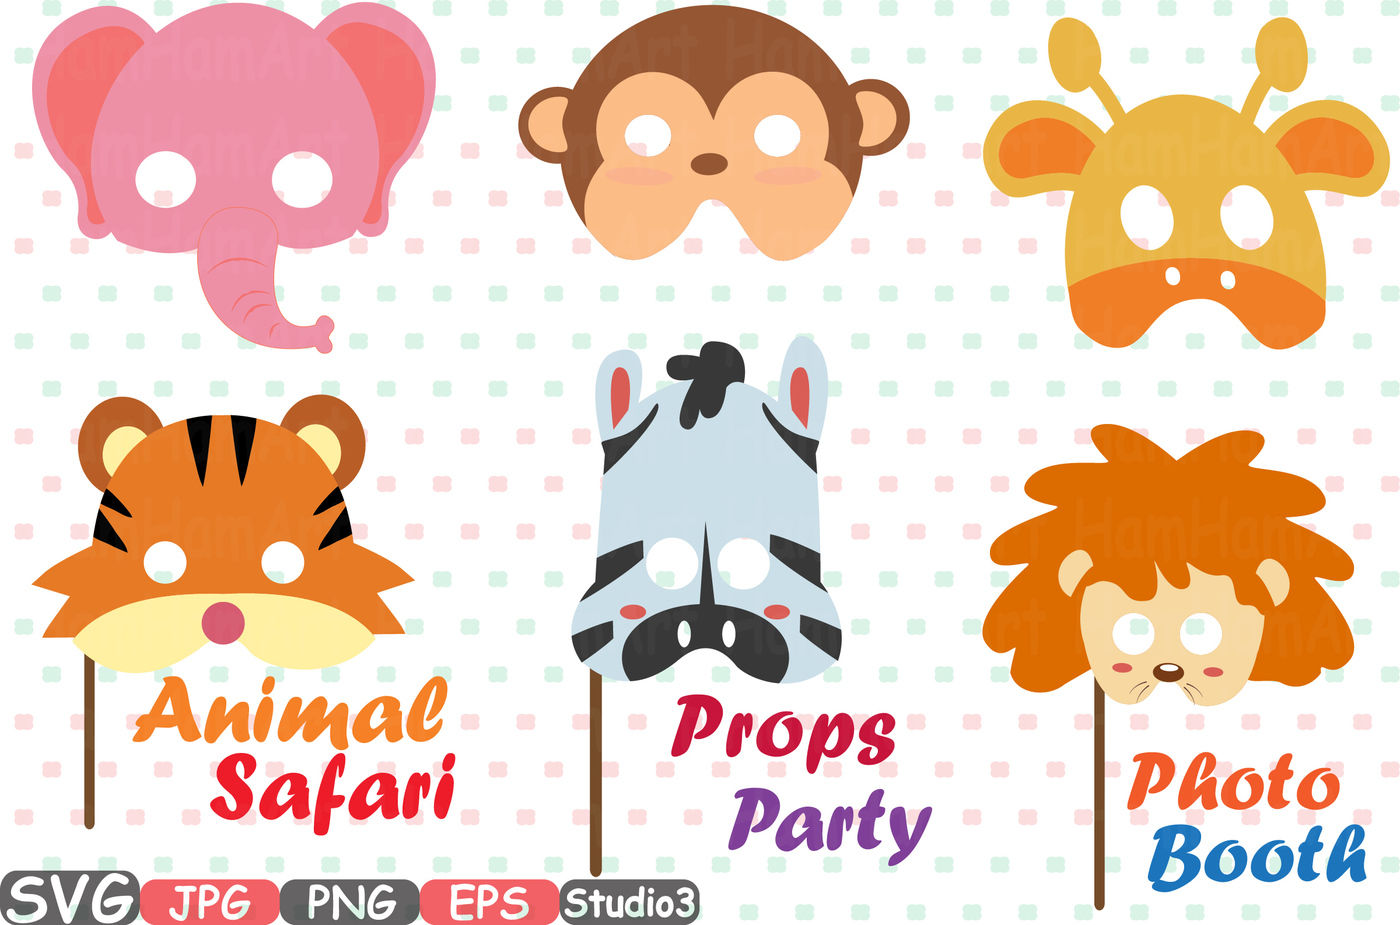 Props Africa Safari Wilderness Mask Booth Party Birthday Silhouette Svg Clipart Bunting Cutting Files Digital Svg Eps Png Jpg Vinyl Sale Woodland Circus Forest Mask Lion Tiger Zebra Elephant Monkey Giraffe 208s